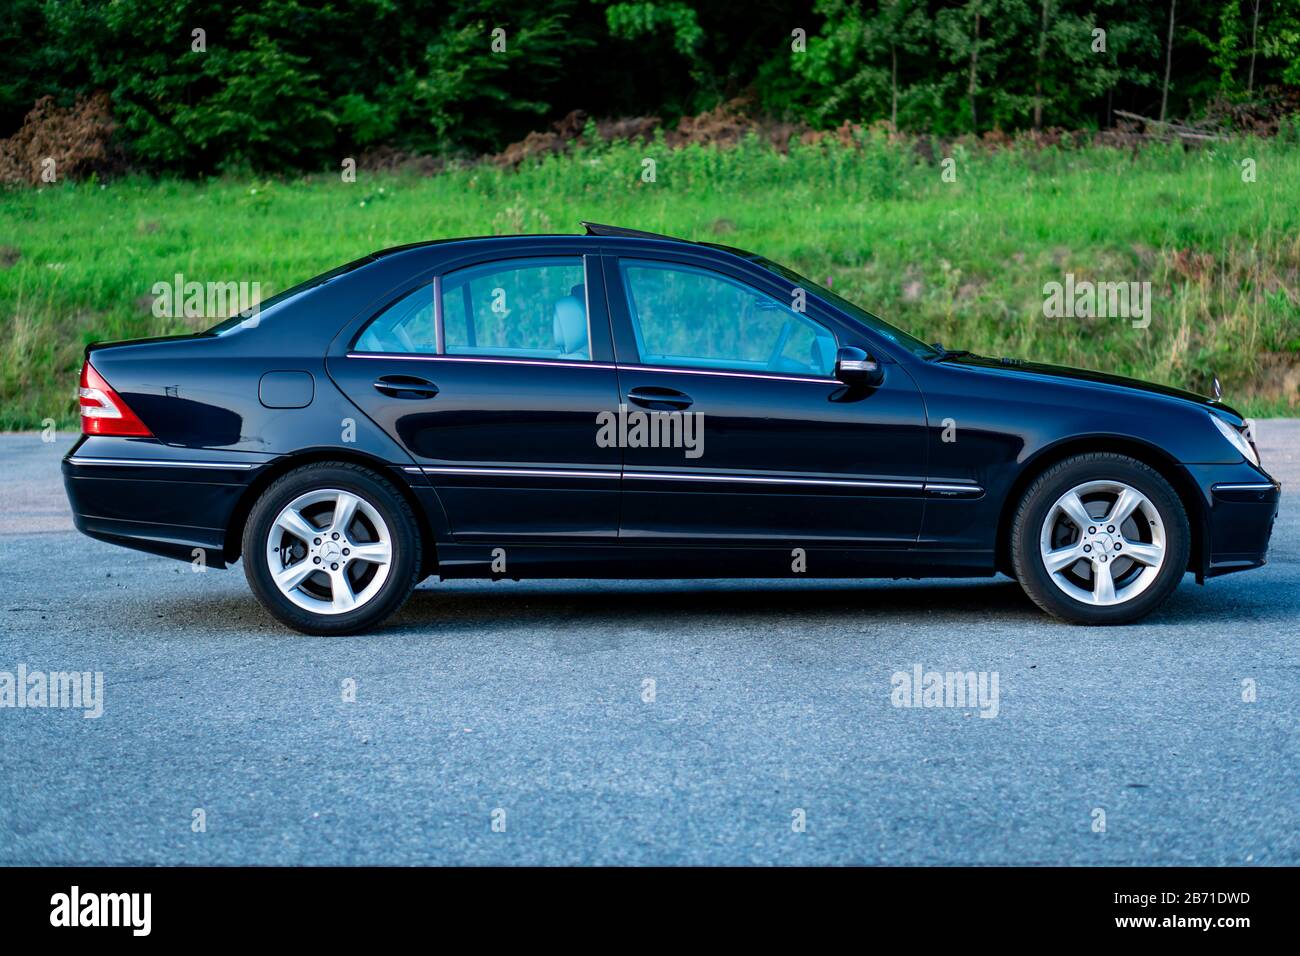 Mercedes Benz W204, year 2008, Avantgarde trim, isolated in an empty  parking lot -winter photo session Stock Photo - Alamy